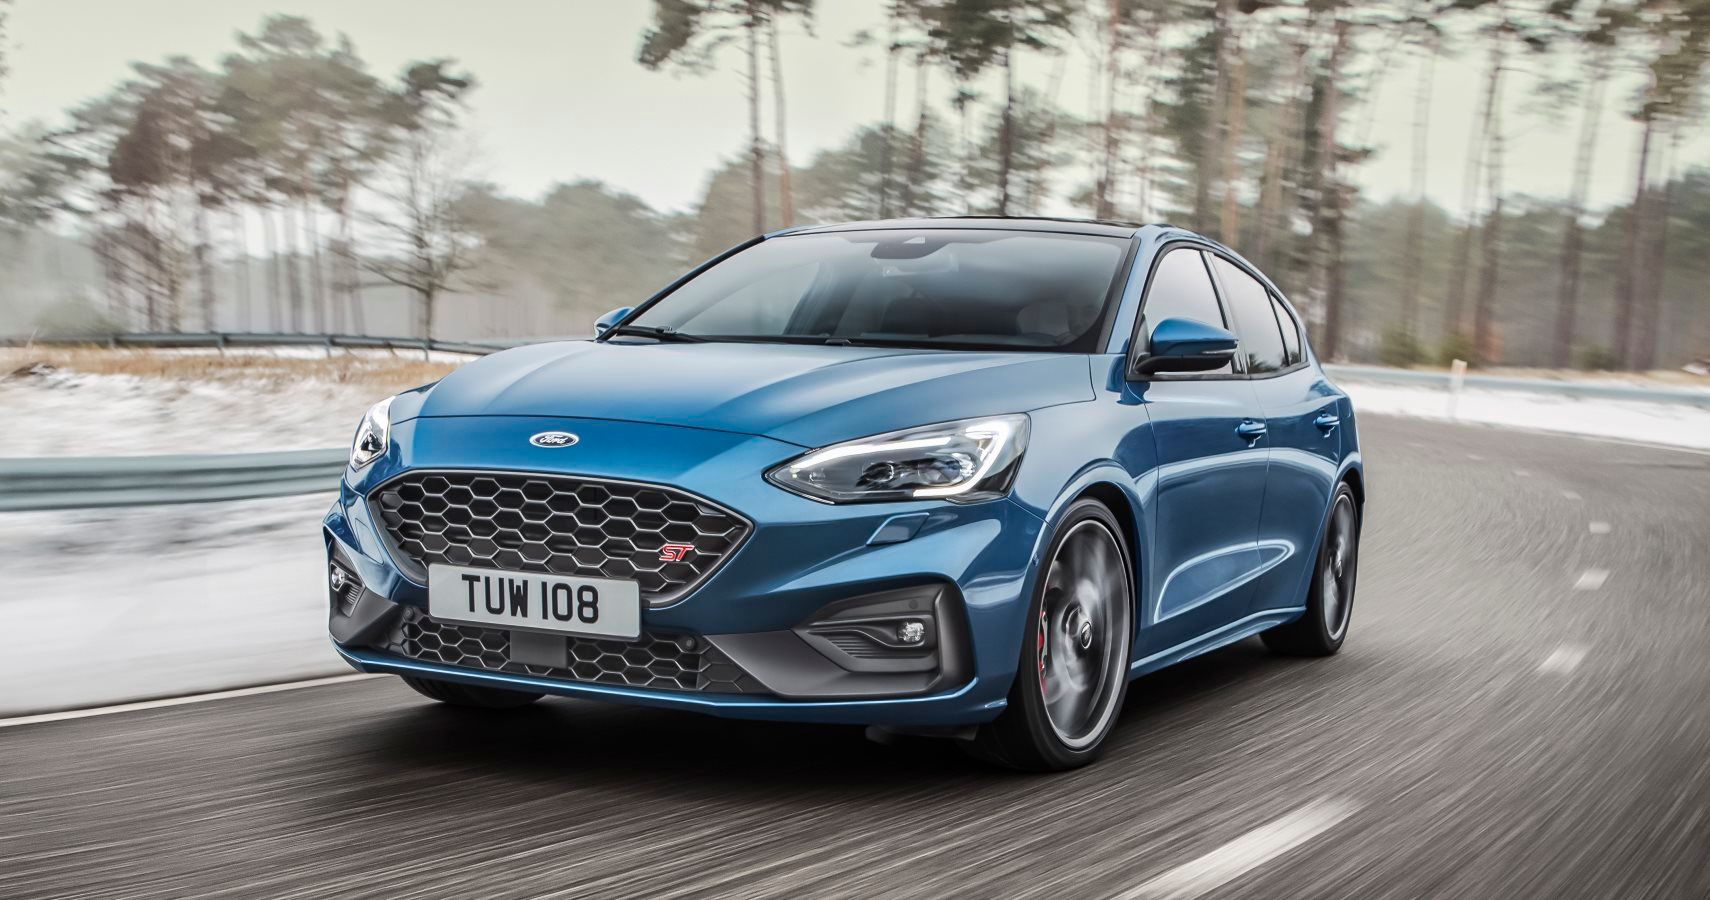 Ford Focus ST Gets More Power Overseas, But Won't Come Back Home To USA